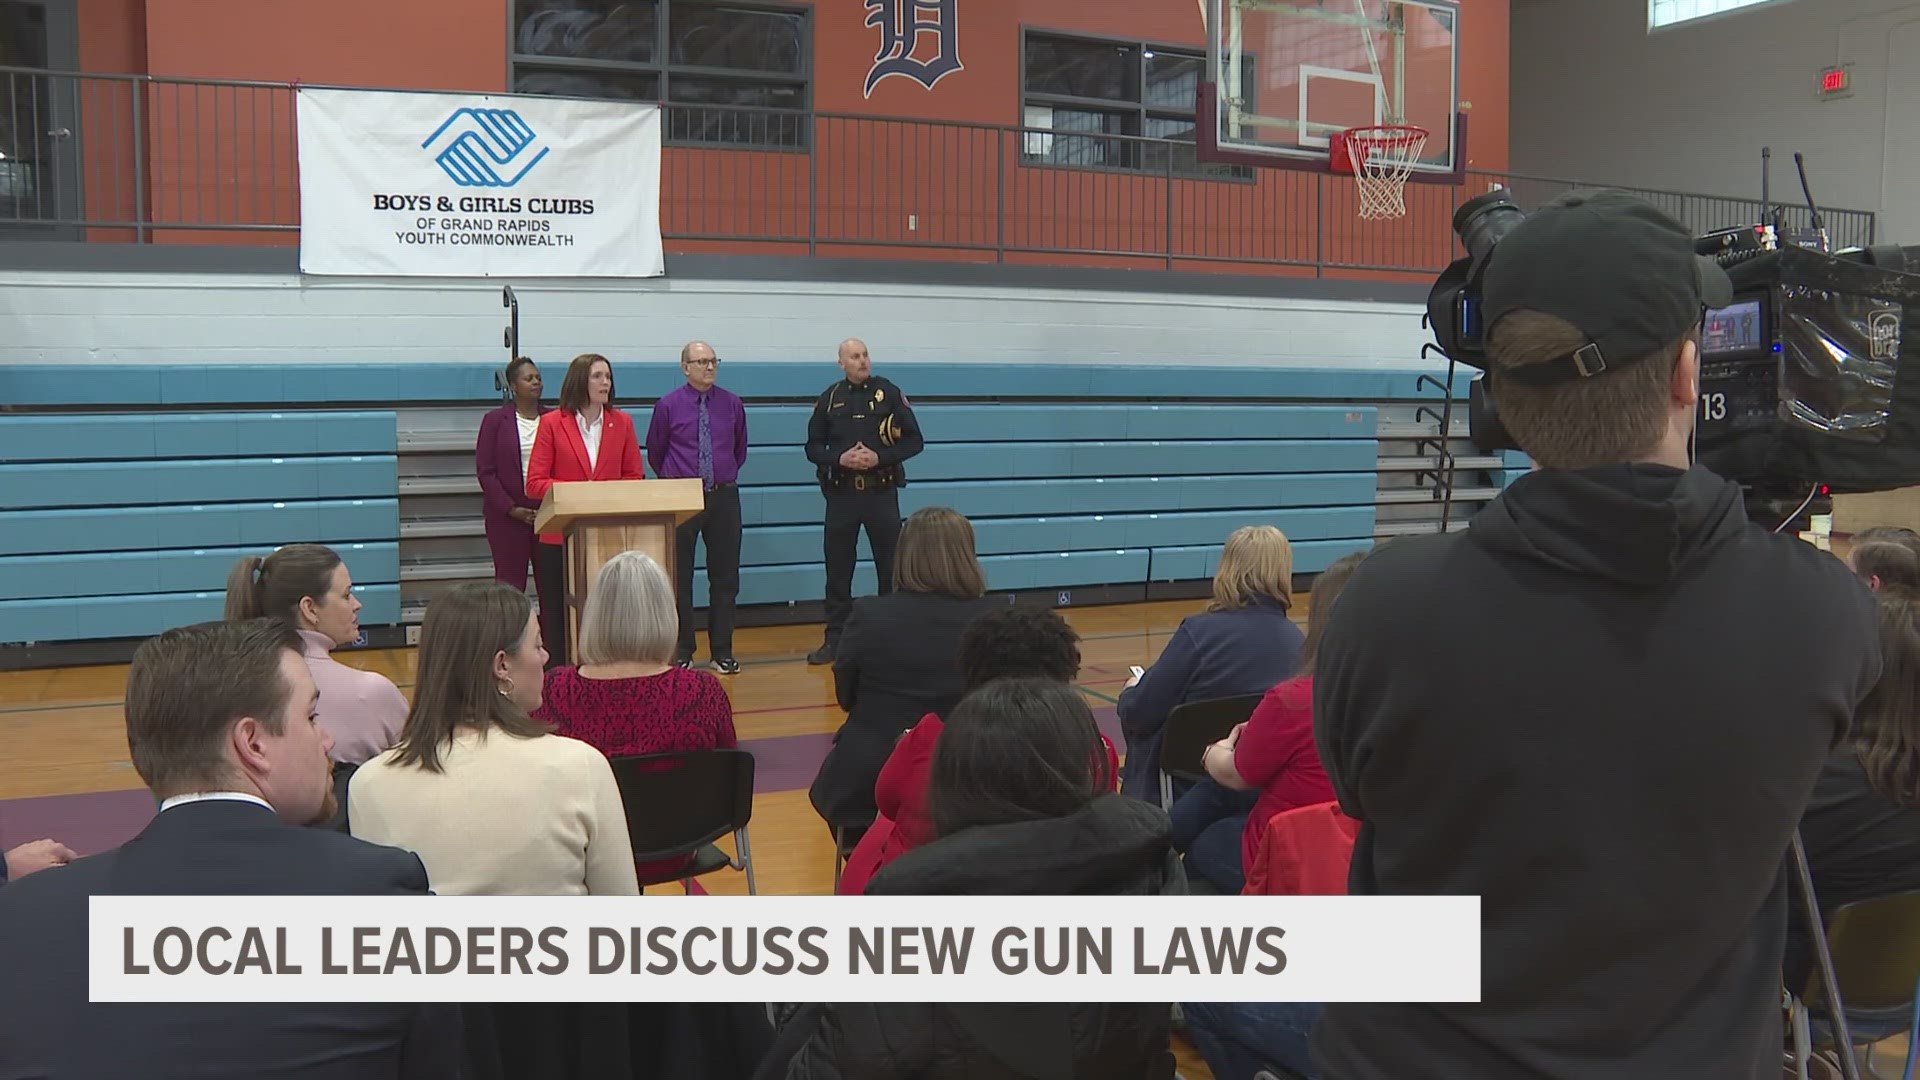 One year after the MSU campus shooting, new gun laws will take effect in Michigan.